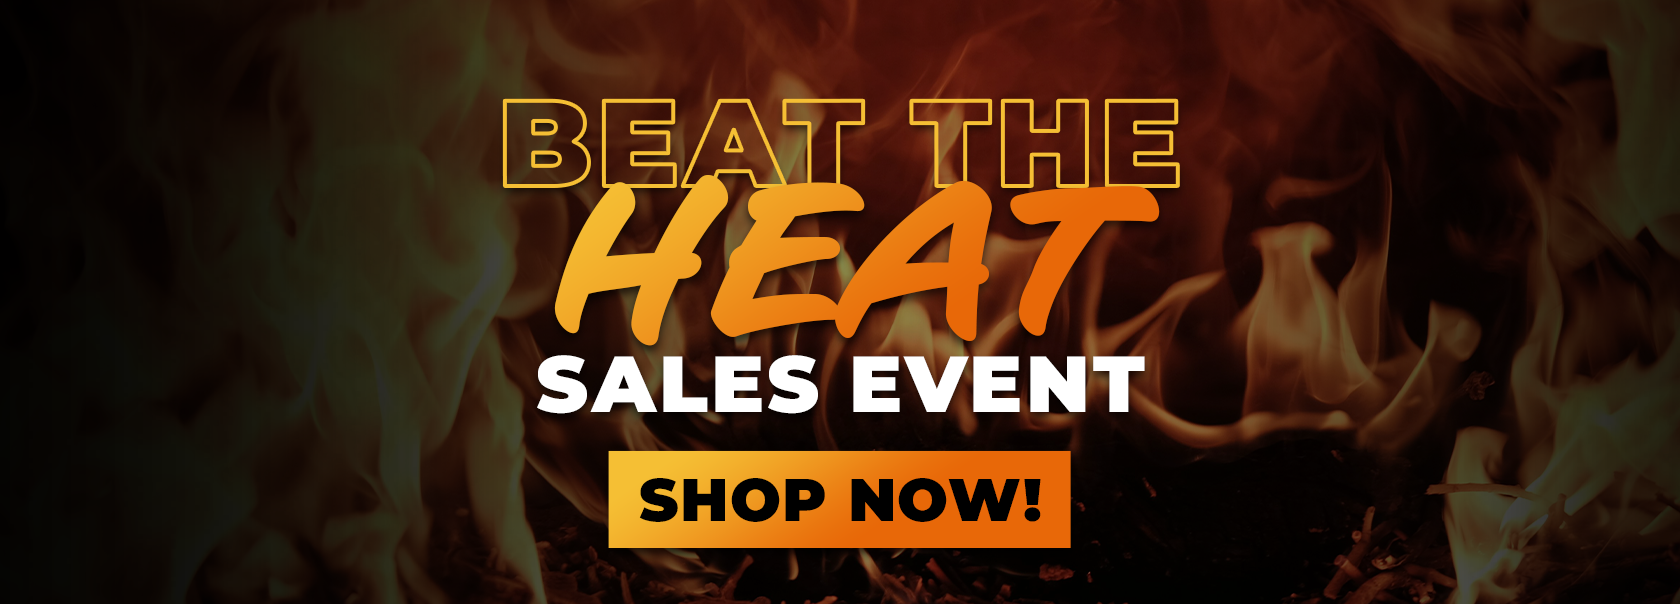 MoundView_BeatTheHeat_Banner_062524.png